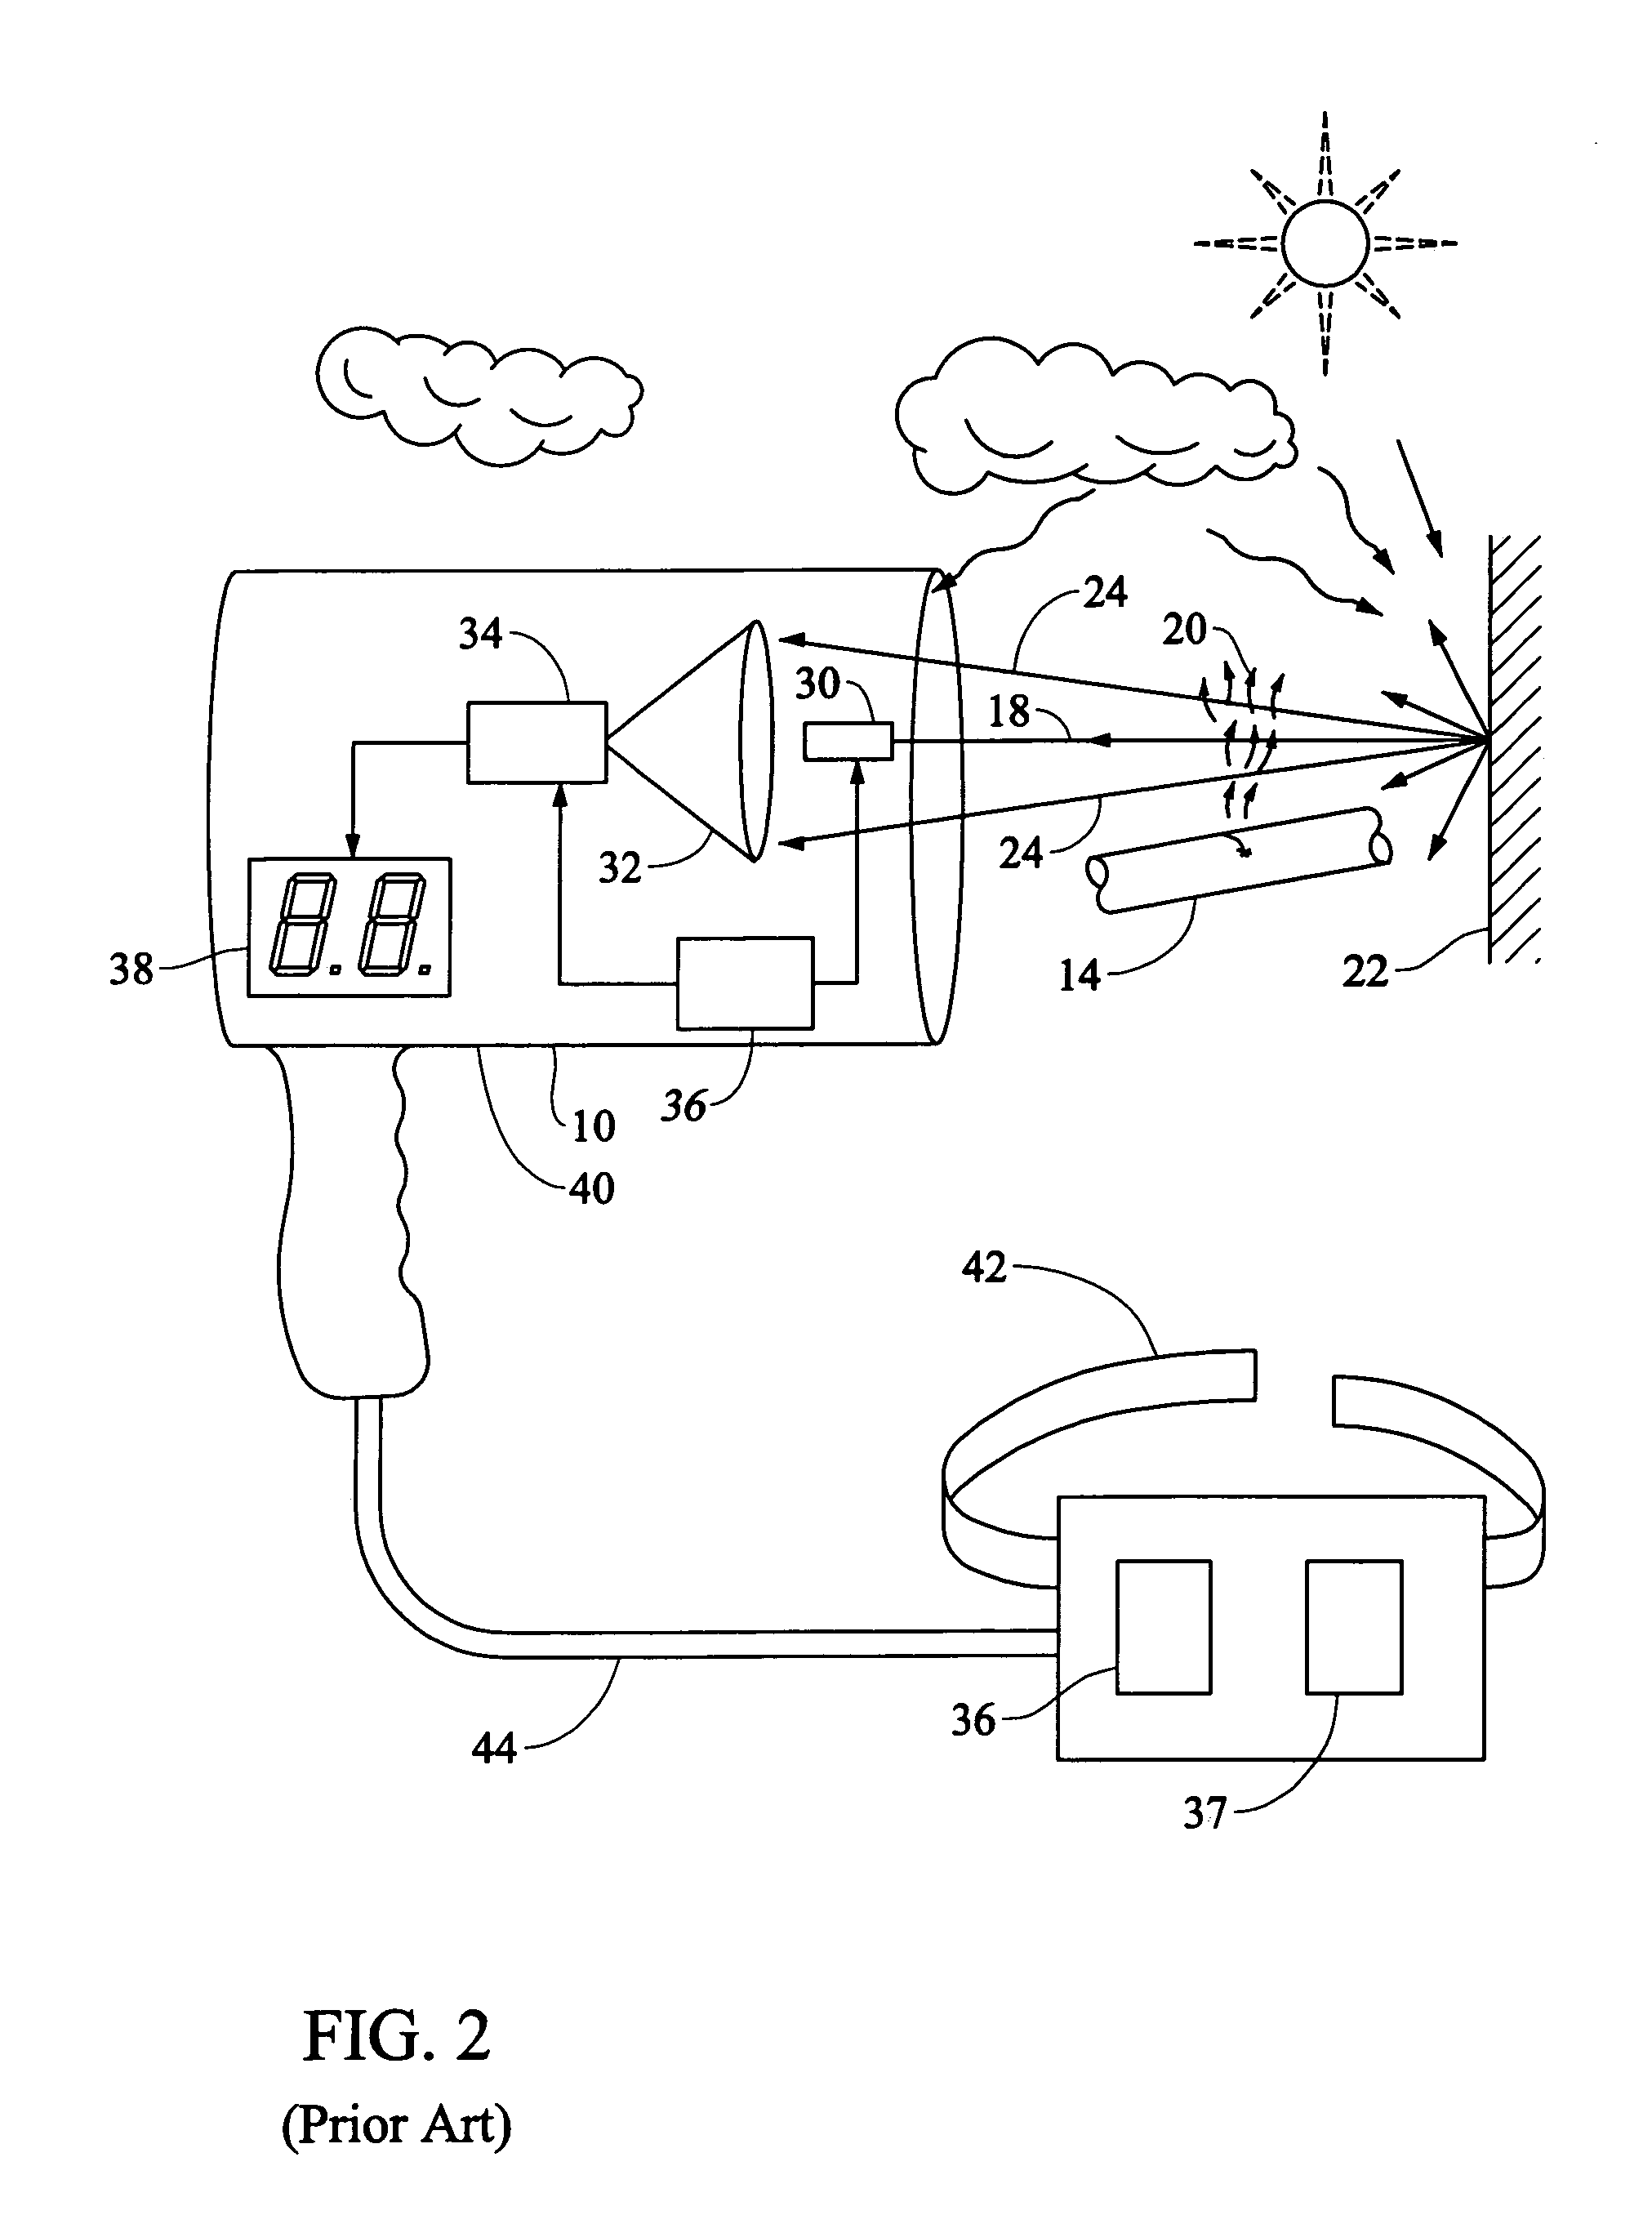 Method and apparatus for laser-based remote methane leak detection